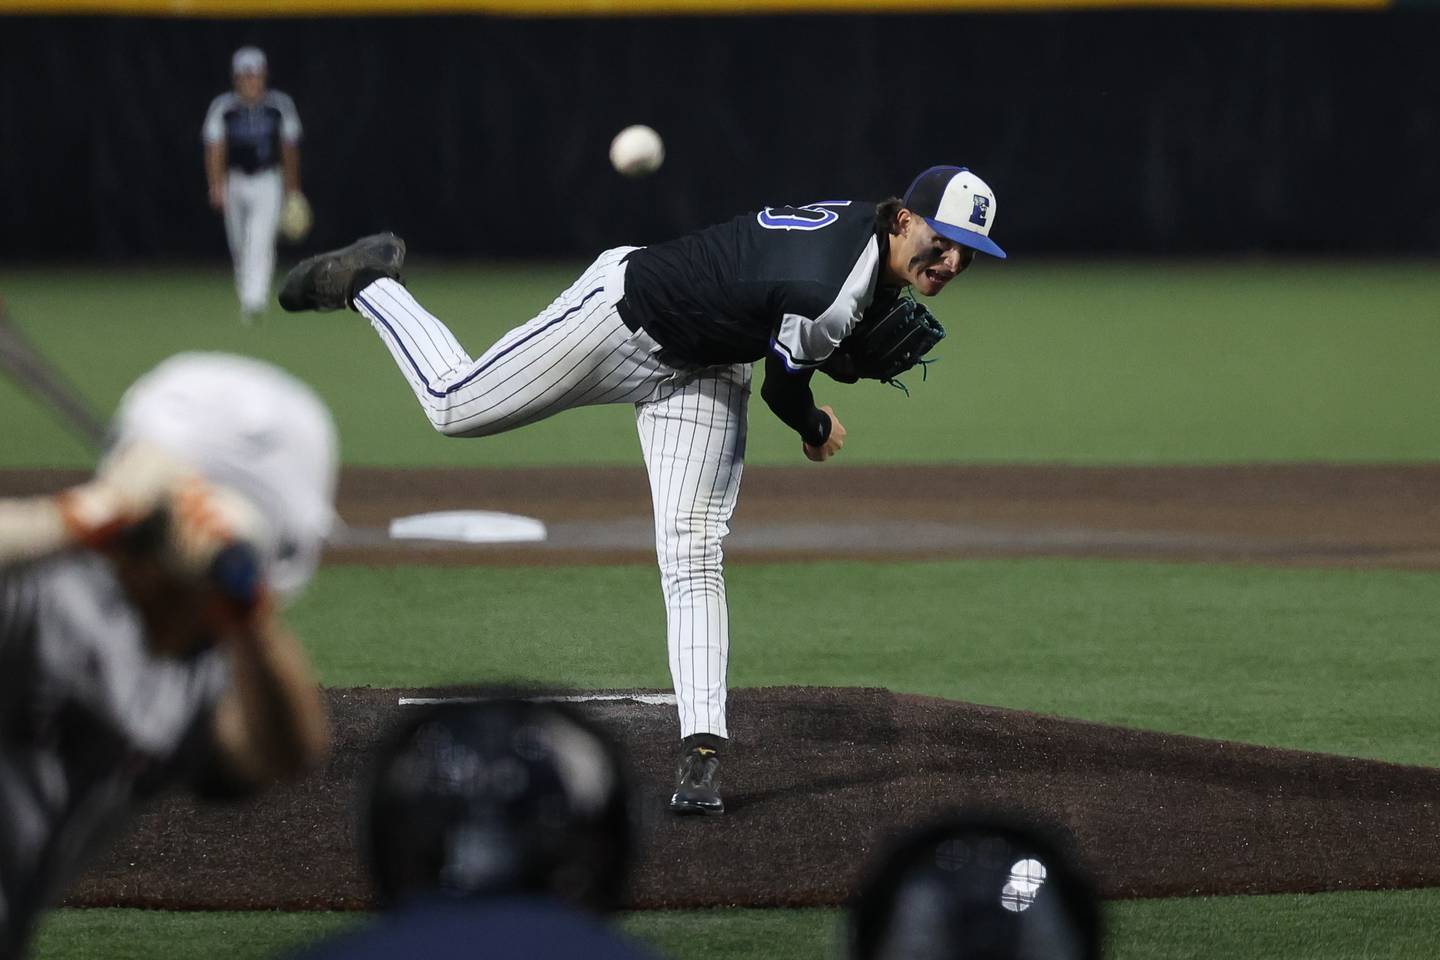 Lincoln-Way East’s Zach Kwasny delivers a pitch against Brother Rice in the Class 4A Crestwood Supersectional on Monday, June 5, 2023 in Crestwood.